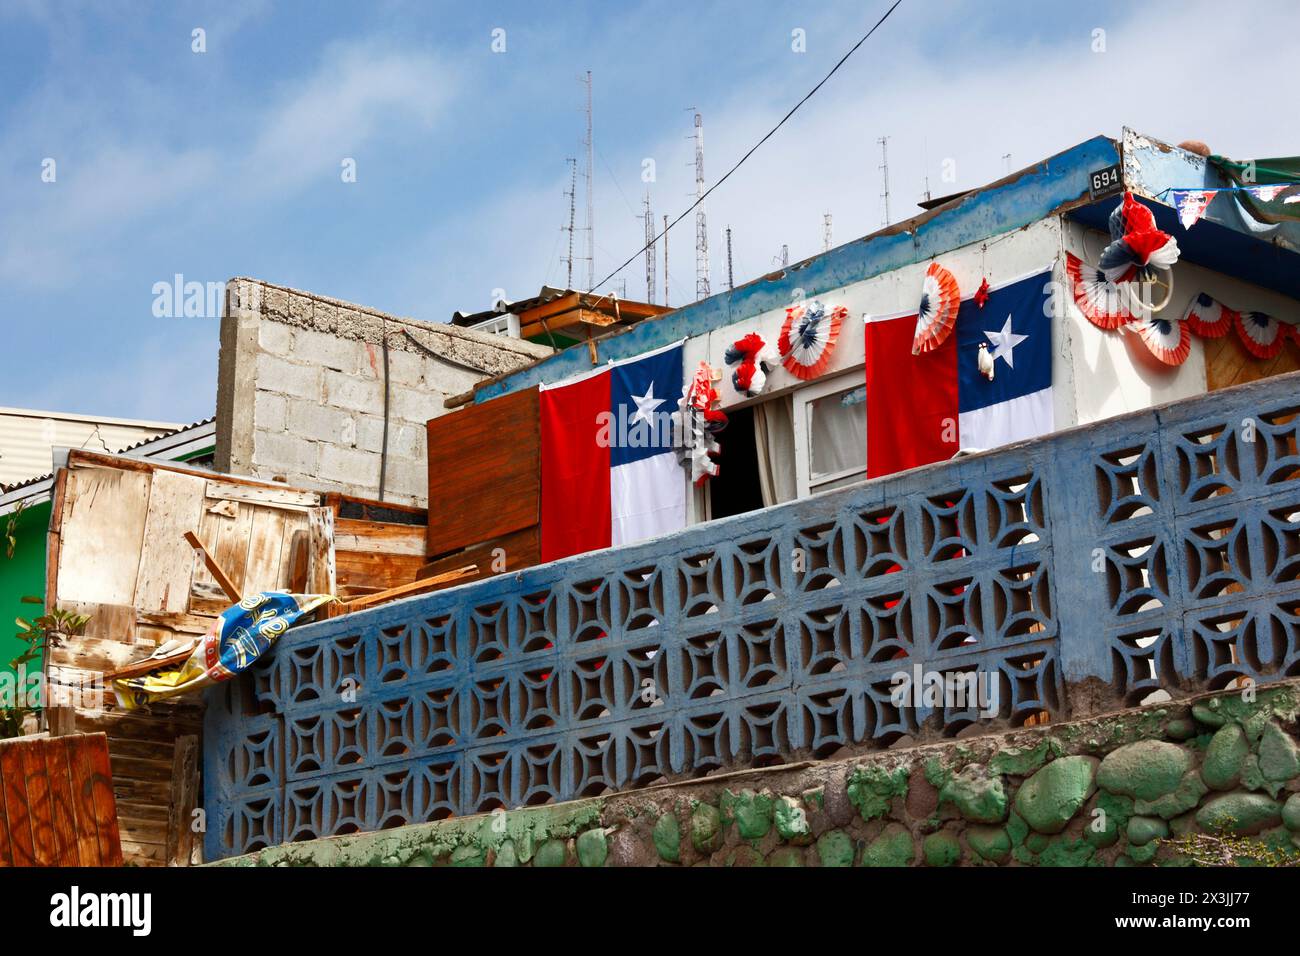 House decorated with Chilean flags for the bicentenary of the establishment of the First Government Junta of Chile on 18th September 1810, Arica Stock Photo